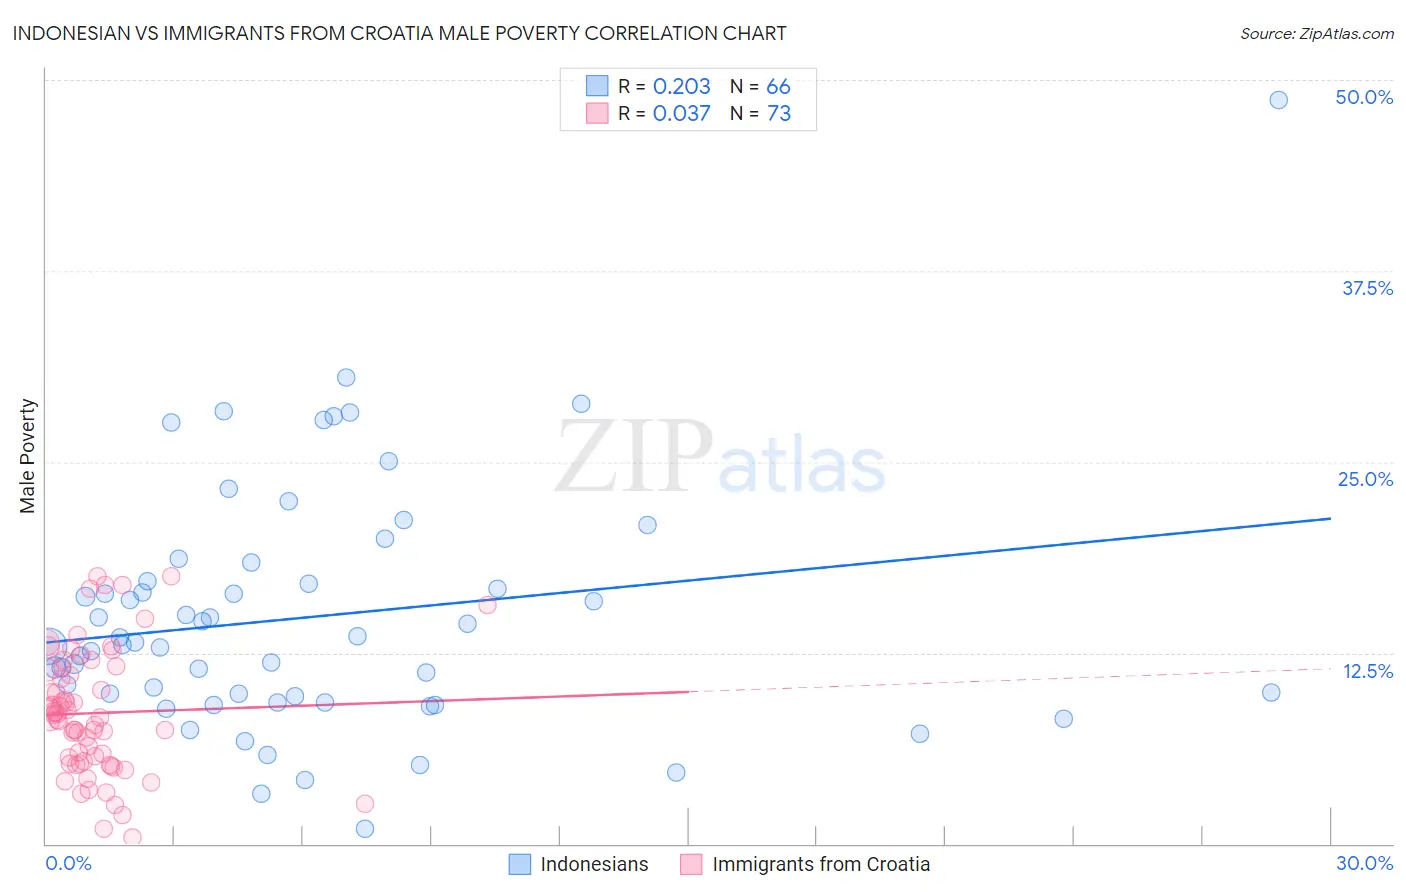 Indonesian vs Immigrants from Croatia Male Poverty